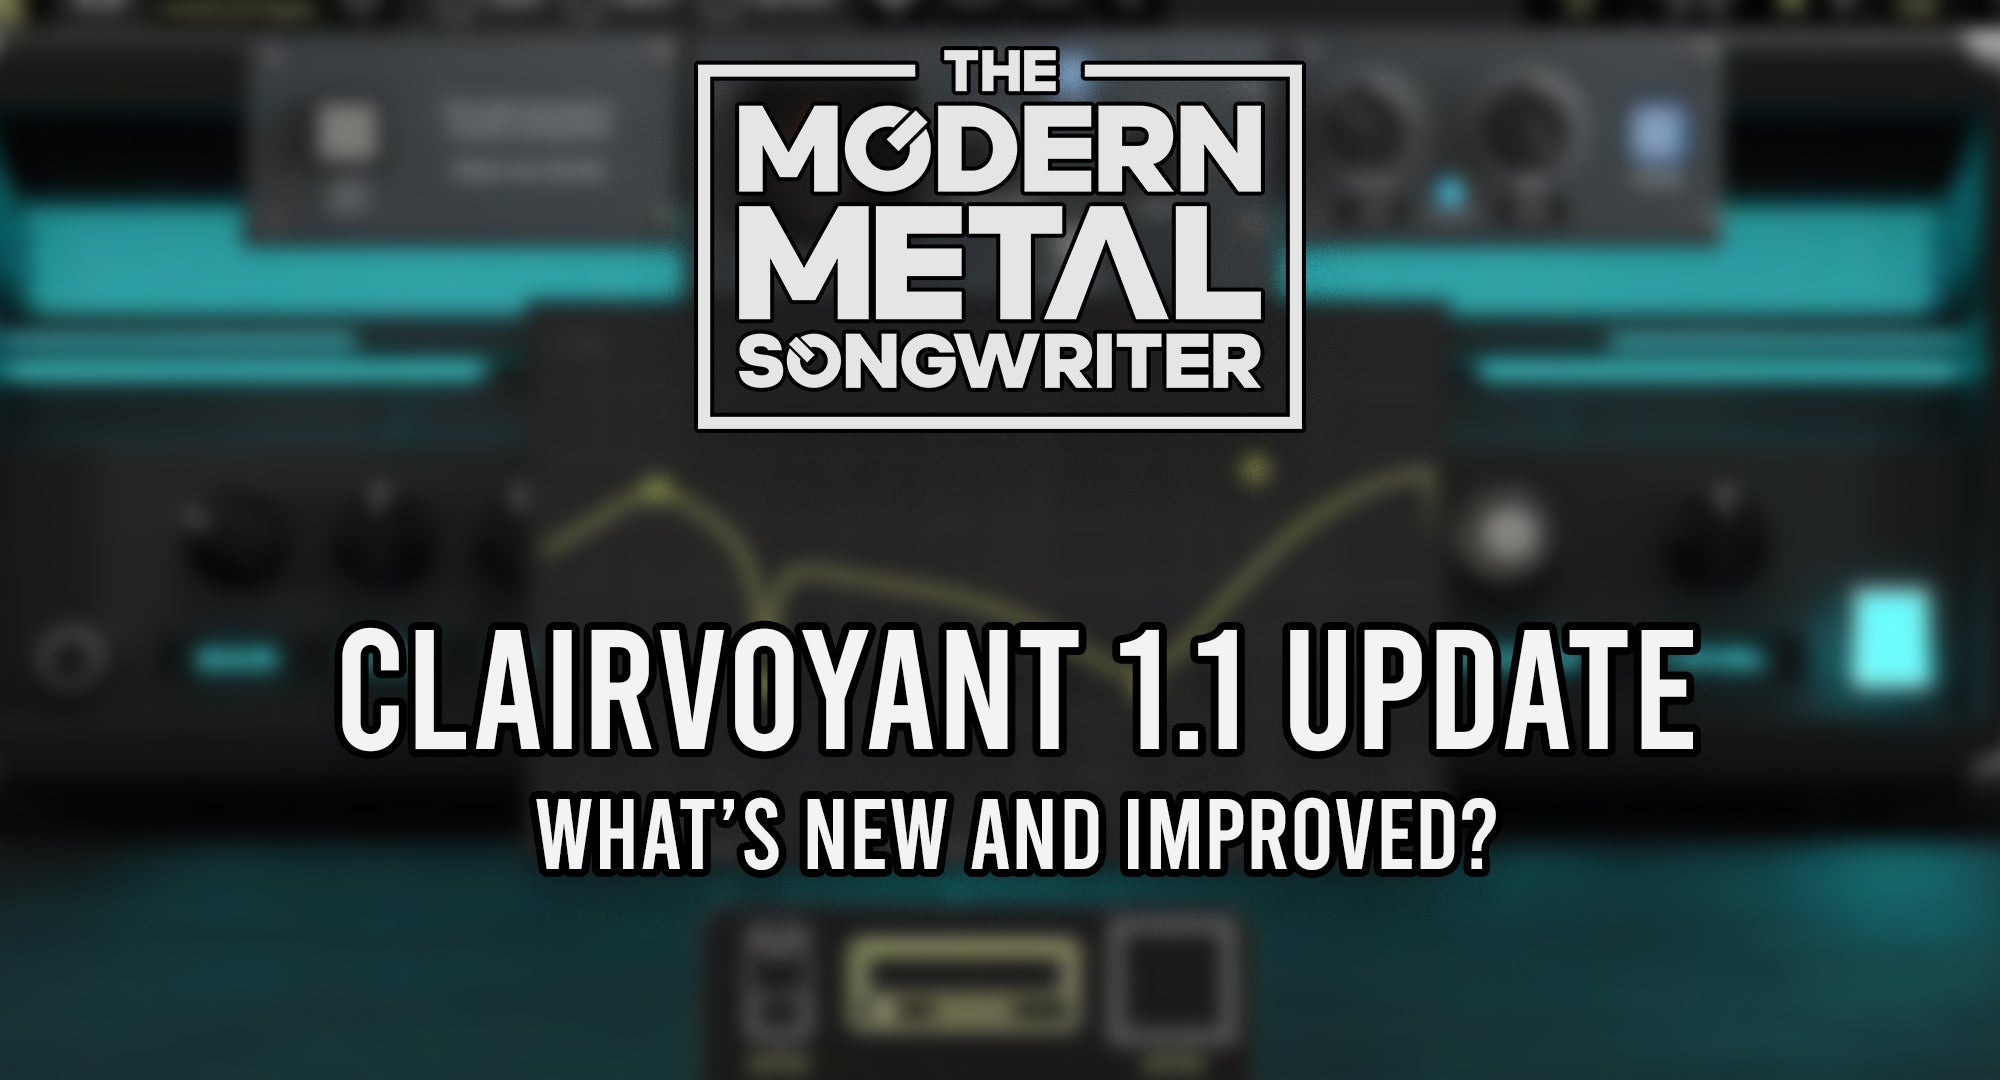 Introducing Clairvoyant Amp Suite Update 1.1: What's New and Improved? ModernMetalSongwriter graphic